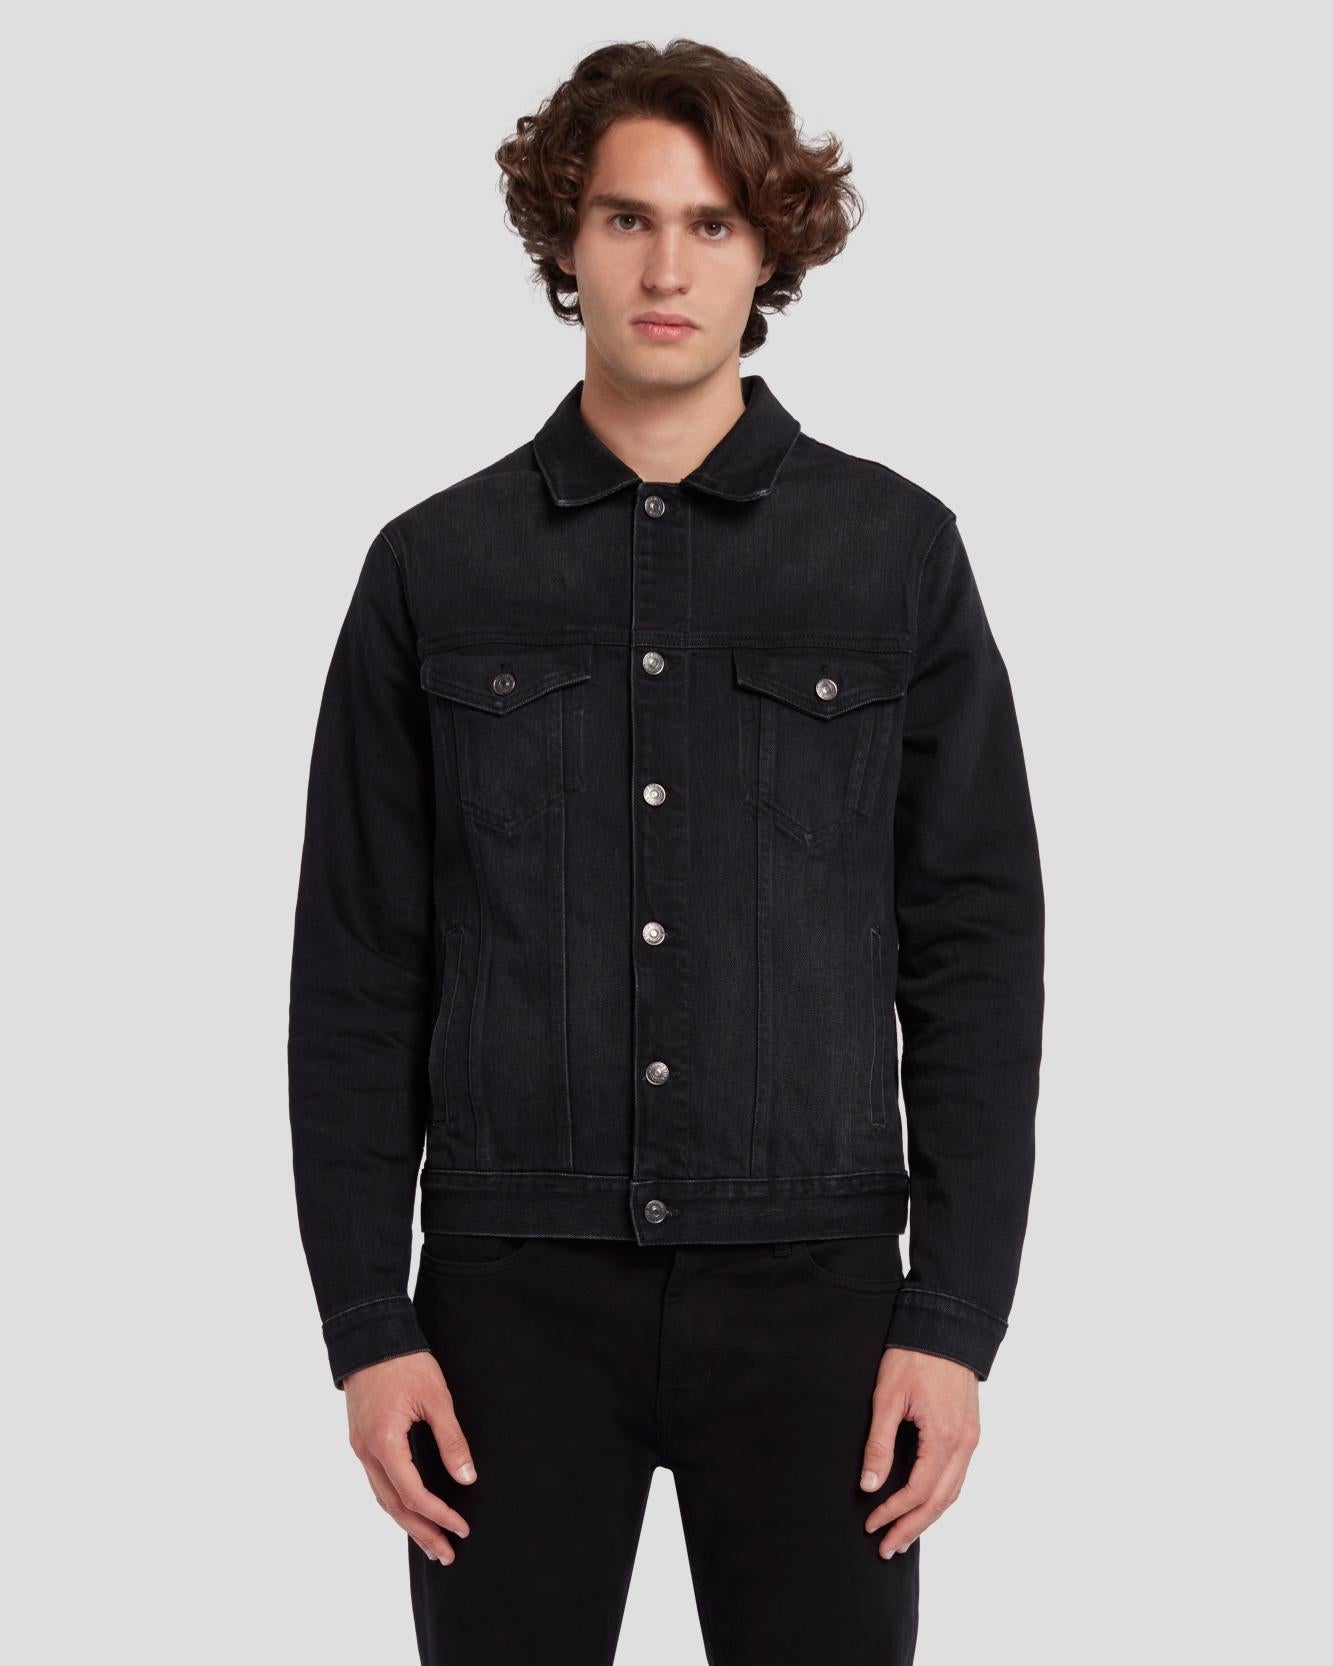 Men's Jackets & Outerwear - Designer Coats | 7 For All Mankind